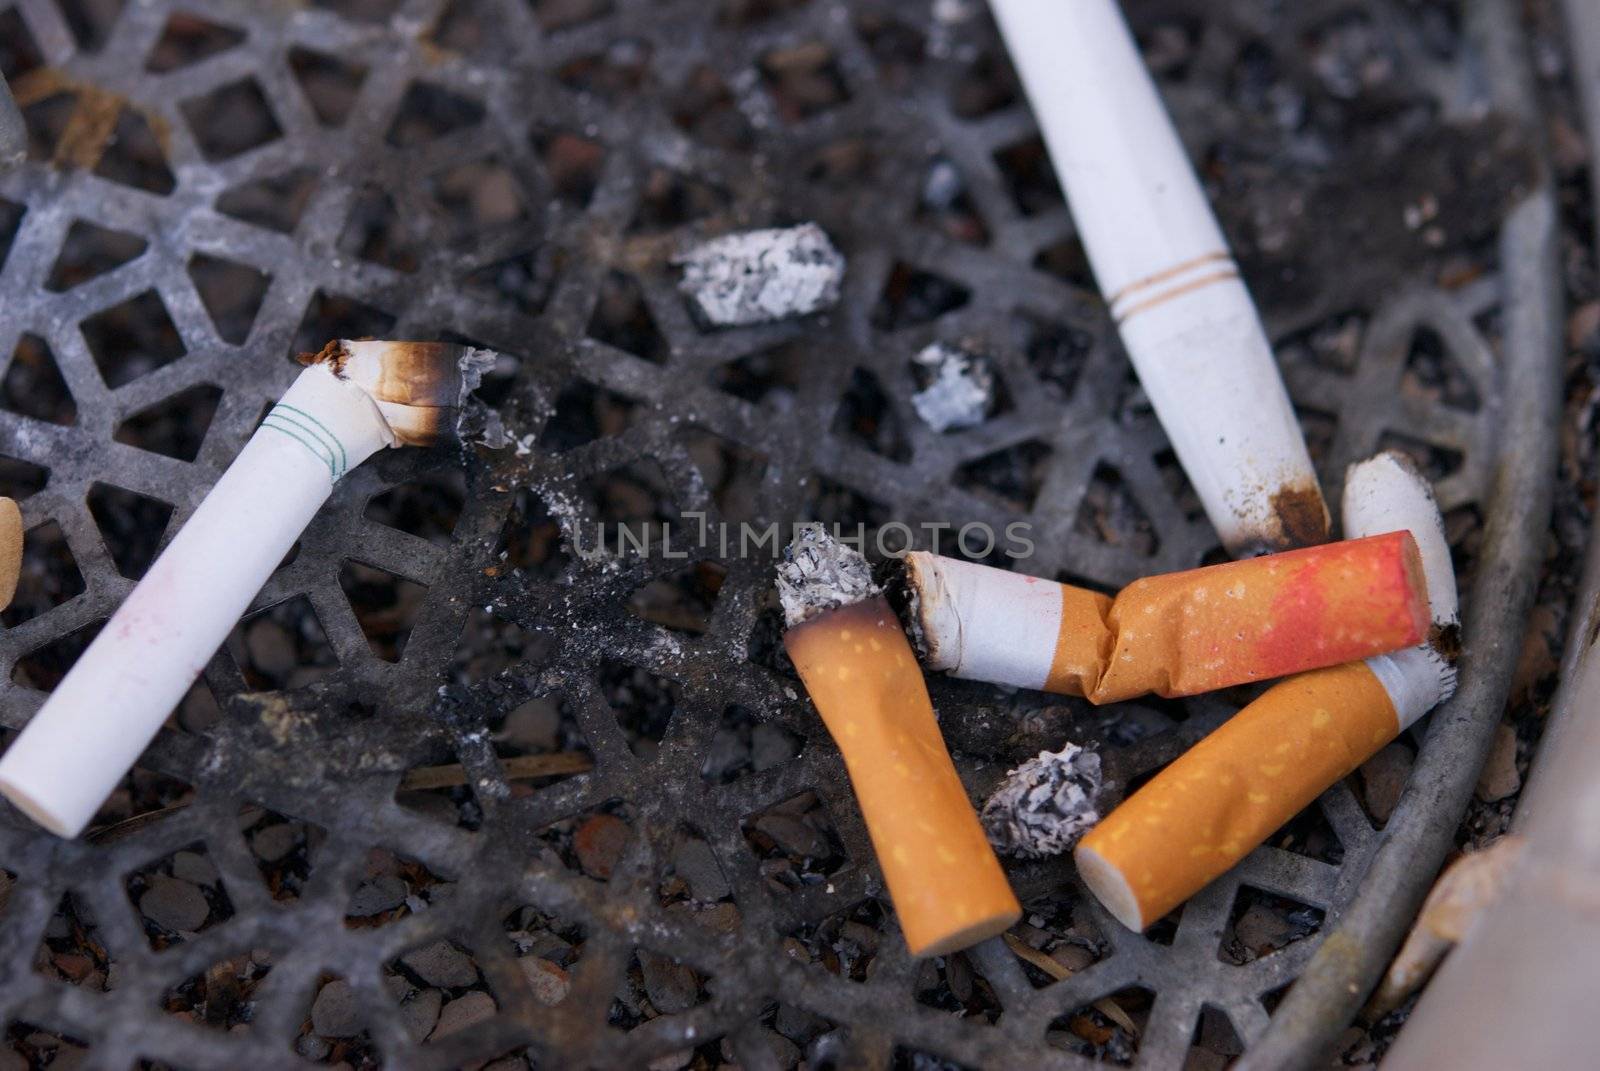 A dirty ashtray with smoked cigarette filters and butts with lipstick on them